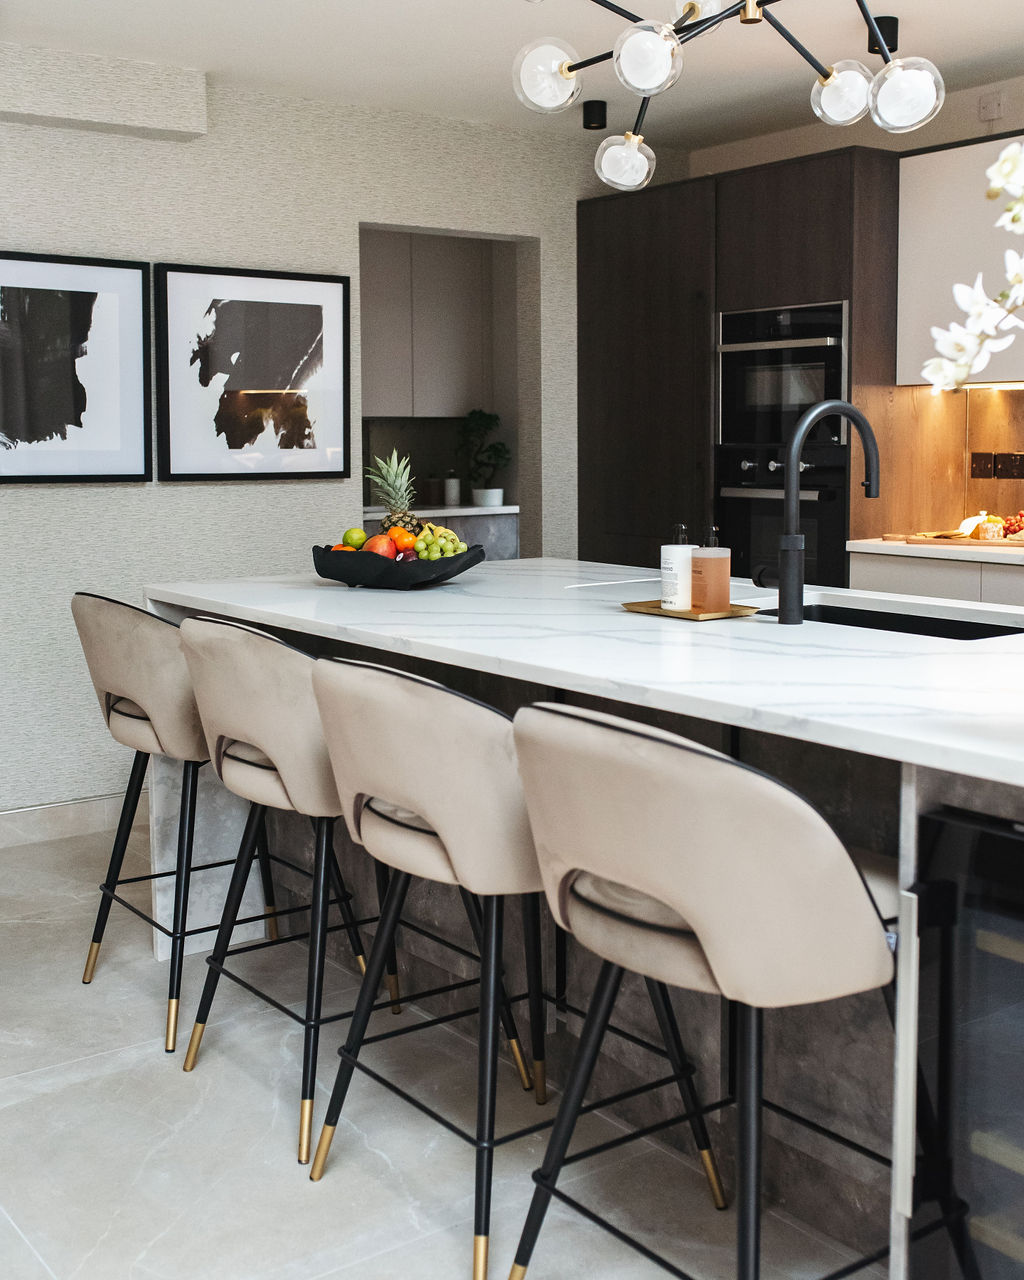 the interior design of a kitchen with cream stools and a marble floor